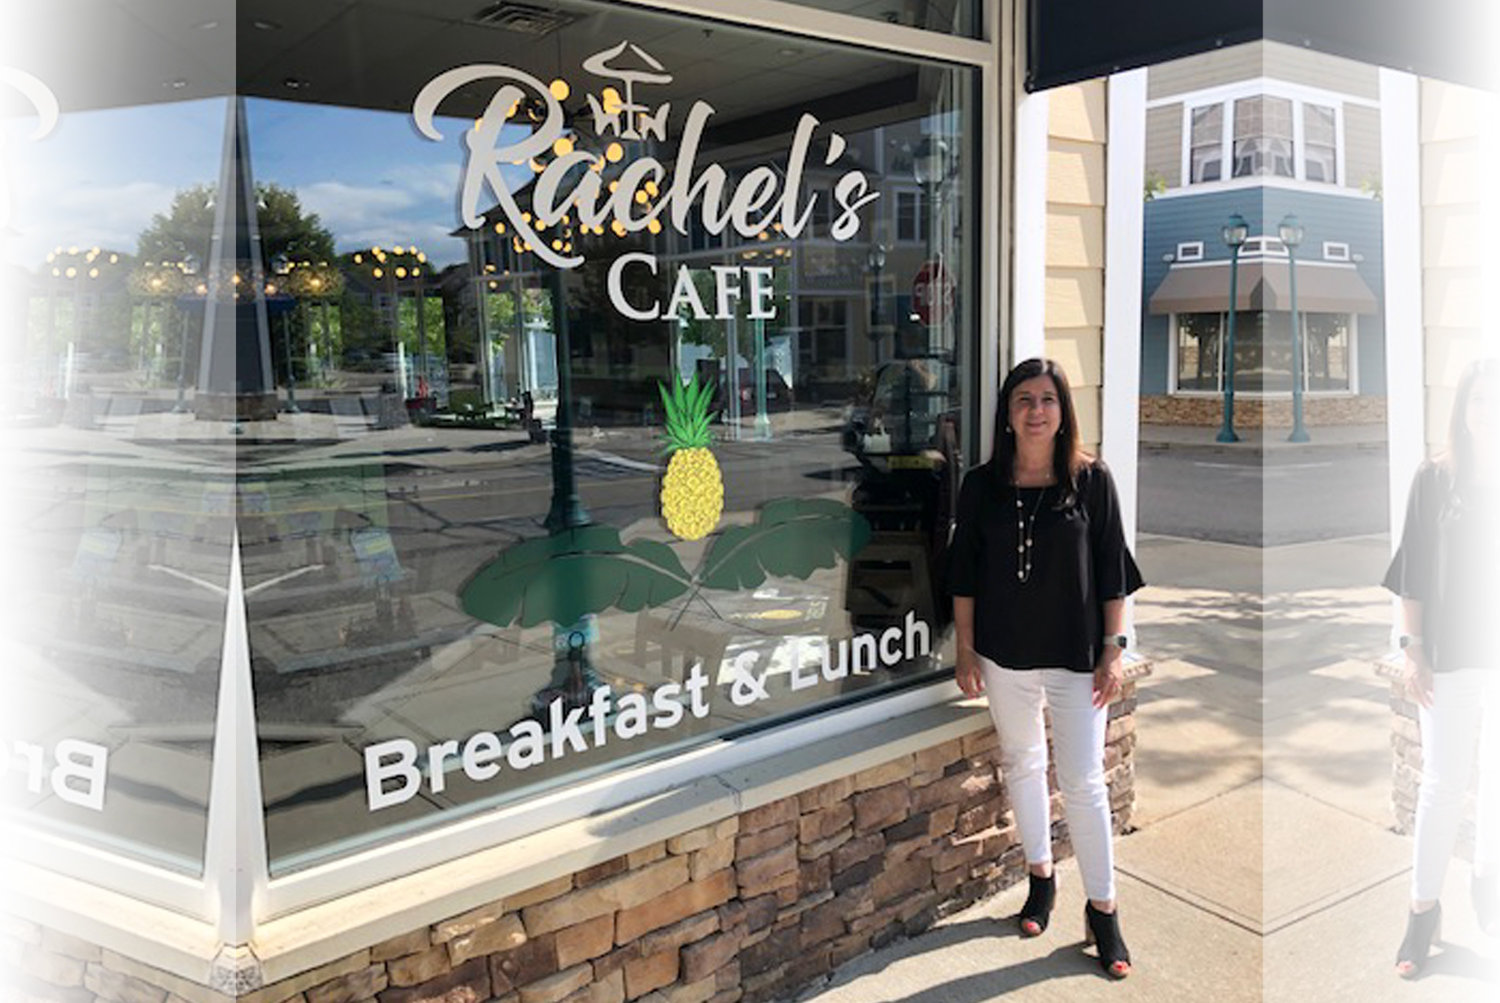 Rachel’s Cafe has finessed their breakfast menu over two years